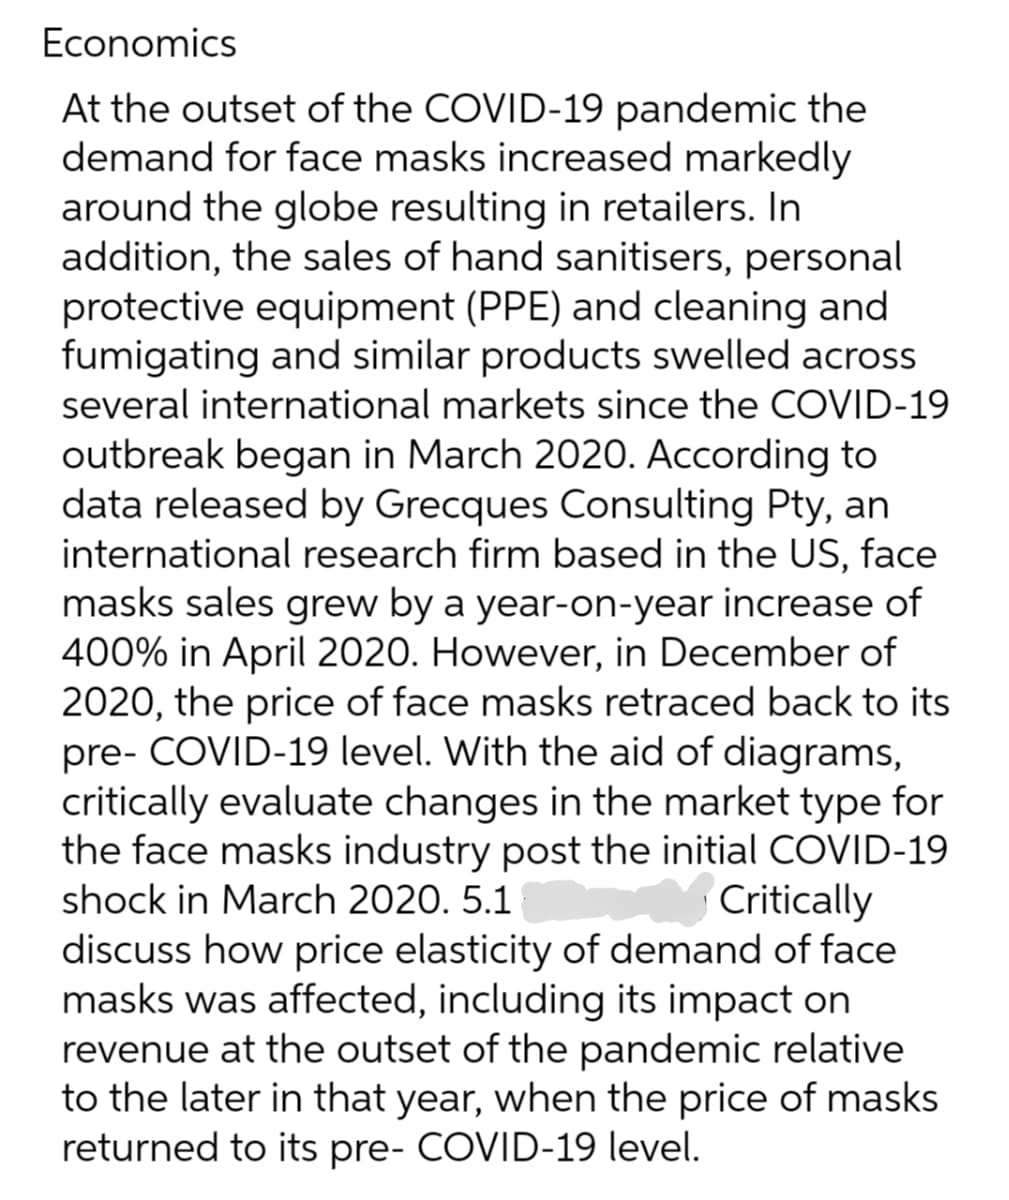 Economics
At the outset of the COVID-19 pandemic the
demand for face masks increased markedly
around the globe resulting in retailers. In
addition, the sales of hand sanitisers, personal
protective equipment (PPE) and cleaning and
fumigating and similar products swelled across
several international markets since the COVID-19
outbreak began in March 2020. According to
data released by Grecques Consulting Pty, an
international research firm based in the US, face
masks sales grew by a year-on-year increase of
400% in April 2020. However, in December of
2020, the price of face masks retraced back to its
pre- COVID-19 level. With the aid of diagrams,
critically evaluate changes in the market type for
the face masks industry post the initial COVID-19
shock in March 2020. 5.1
Critically
discuss how price elasticity of demand of face
masks was affected, including its impact on
revenue at the outset of the pandemic relative
to the later in that year, when the price of masks
returned to its pre- COVID-19 level.